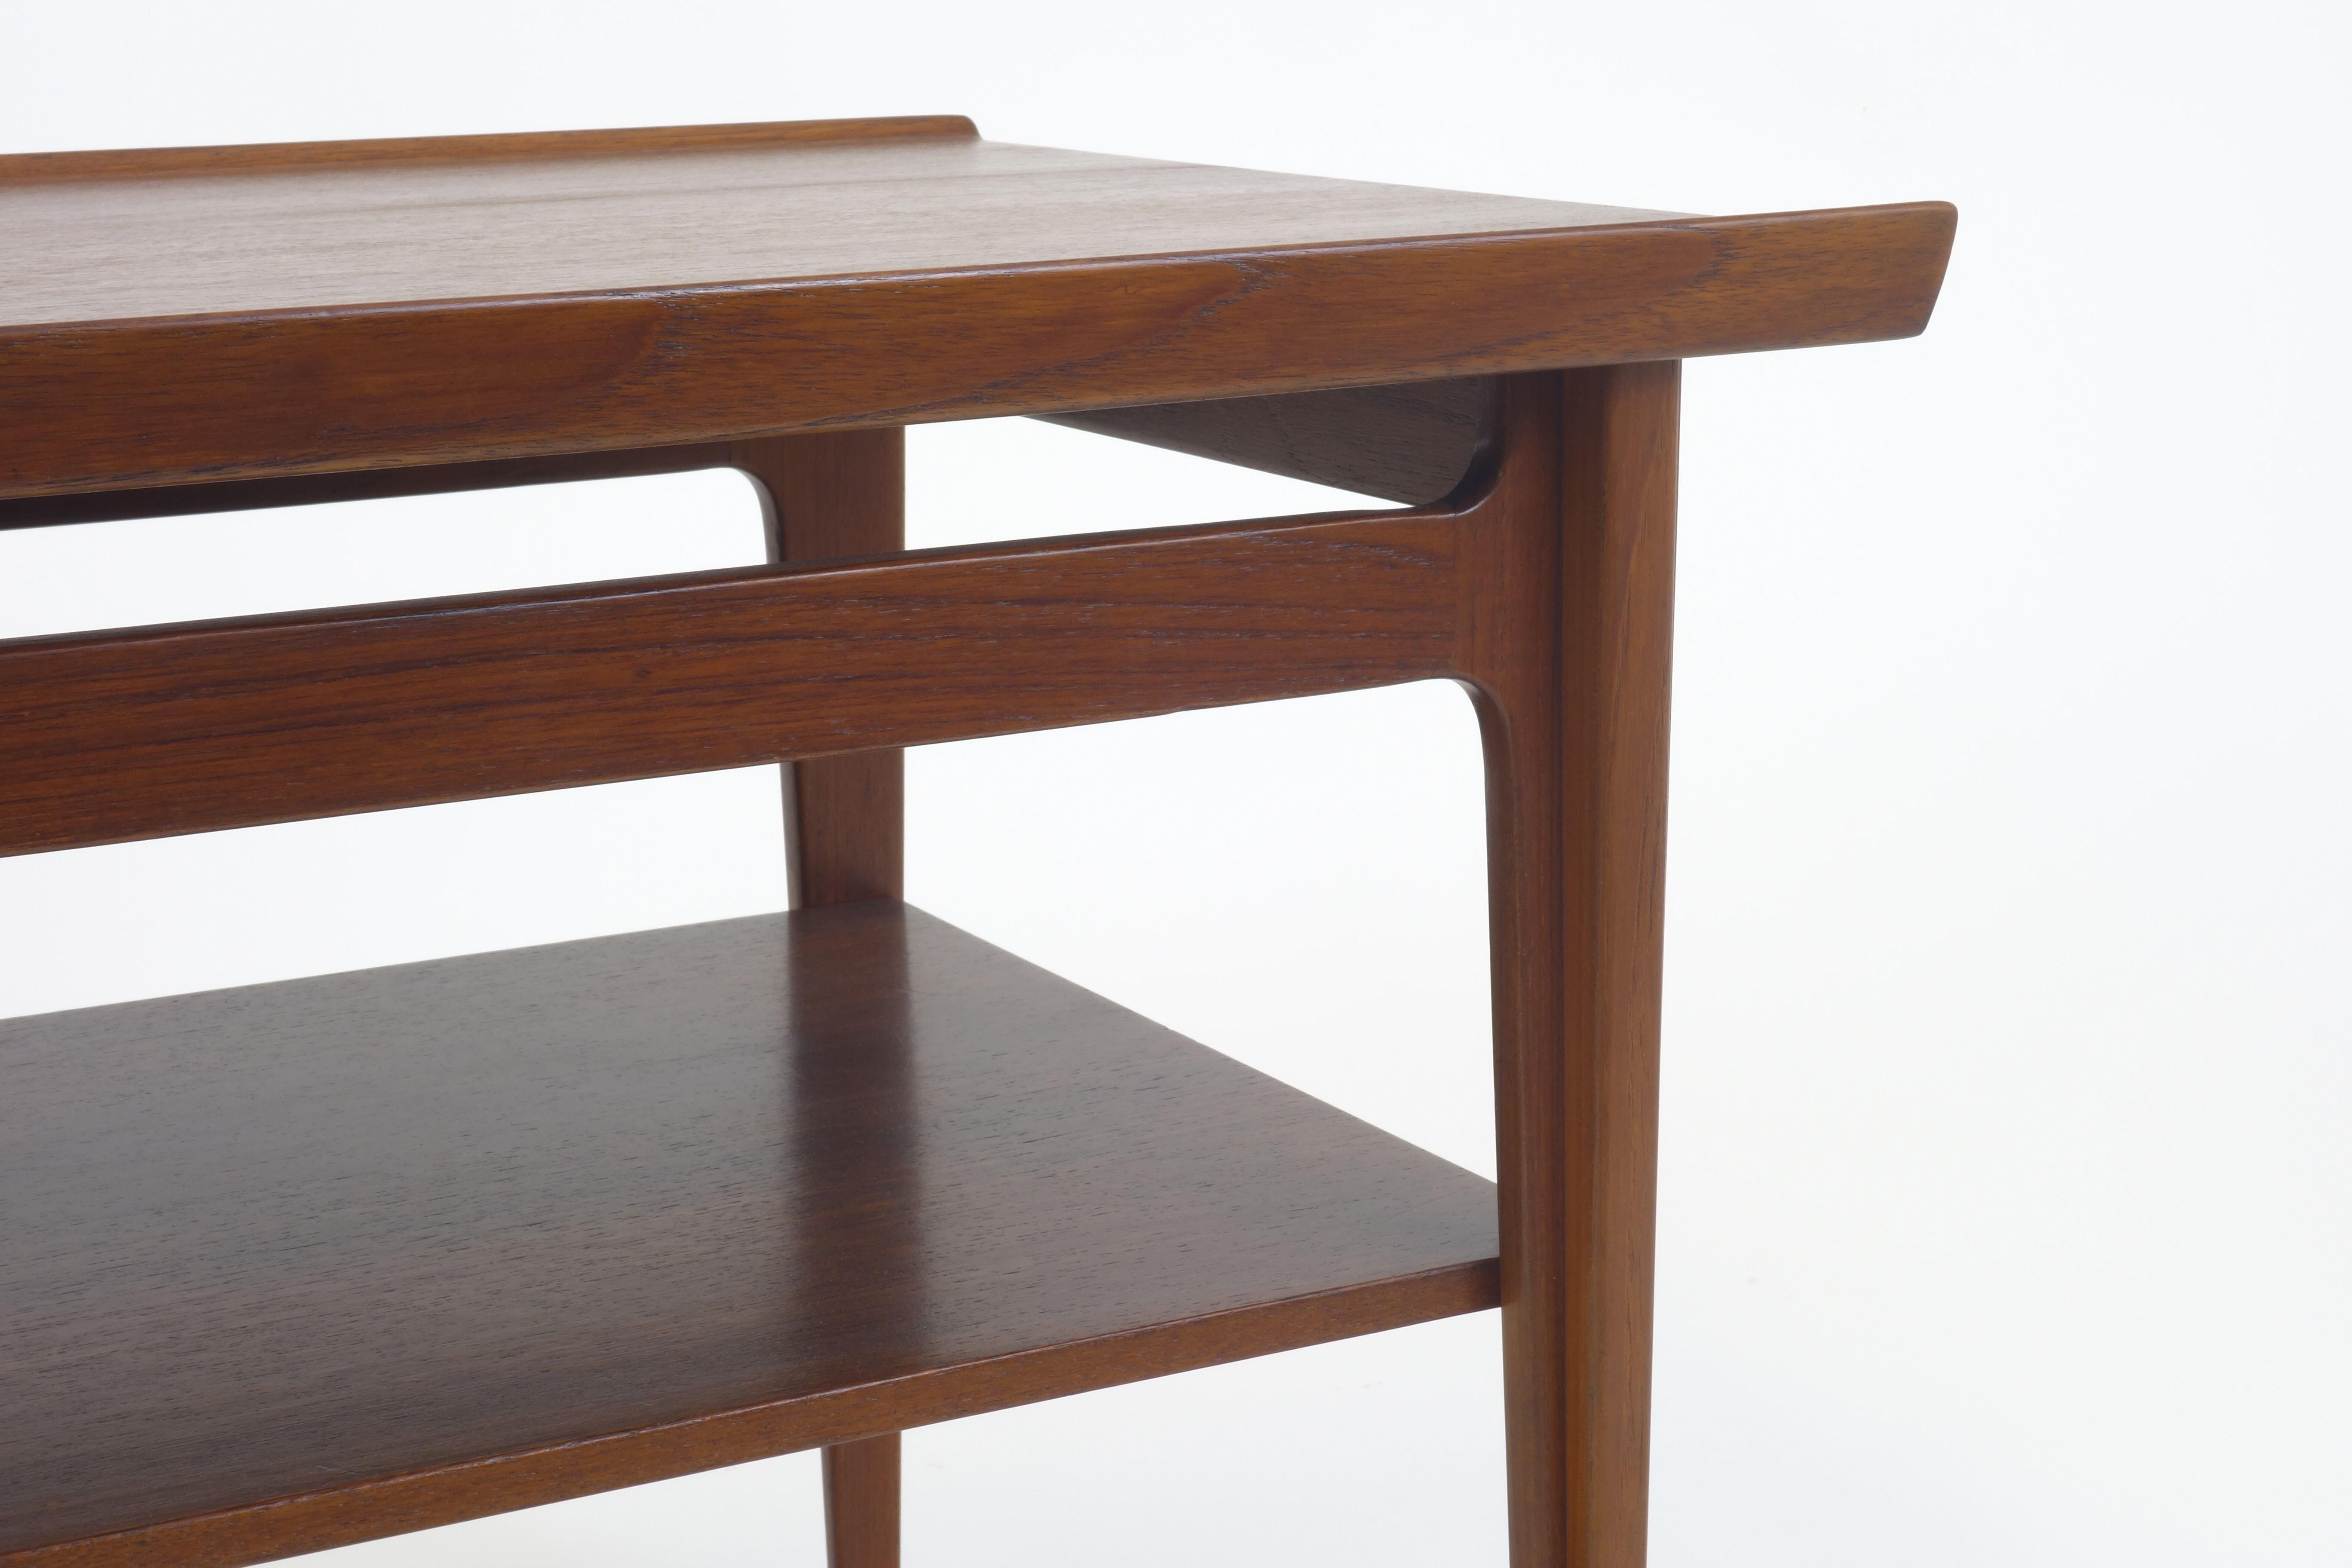 Very fine detailed and refined sidetable by Finn Juhl, manufactured by France&Sons, Denmark. This object bears the typical language his so called Diplomat furniture series, created in the late 1950s.